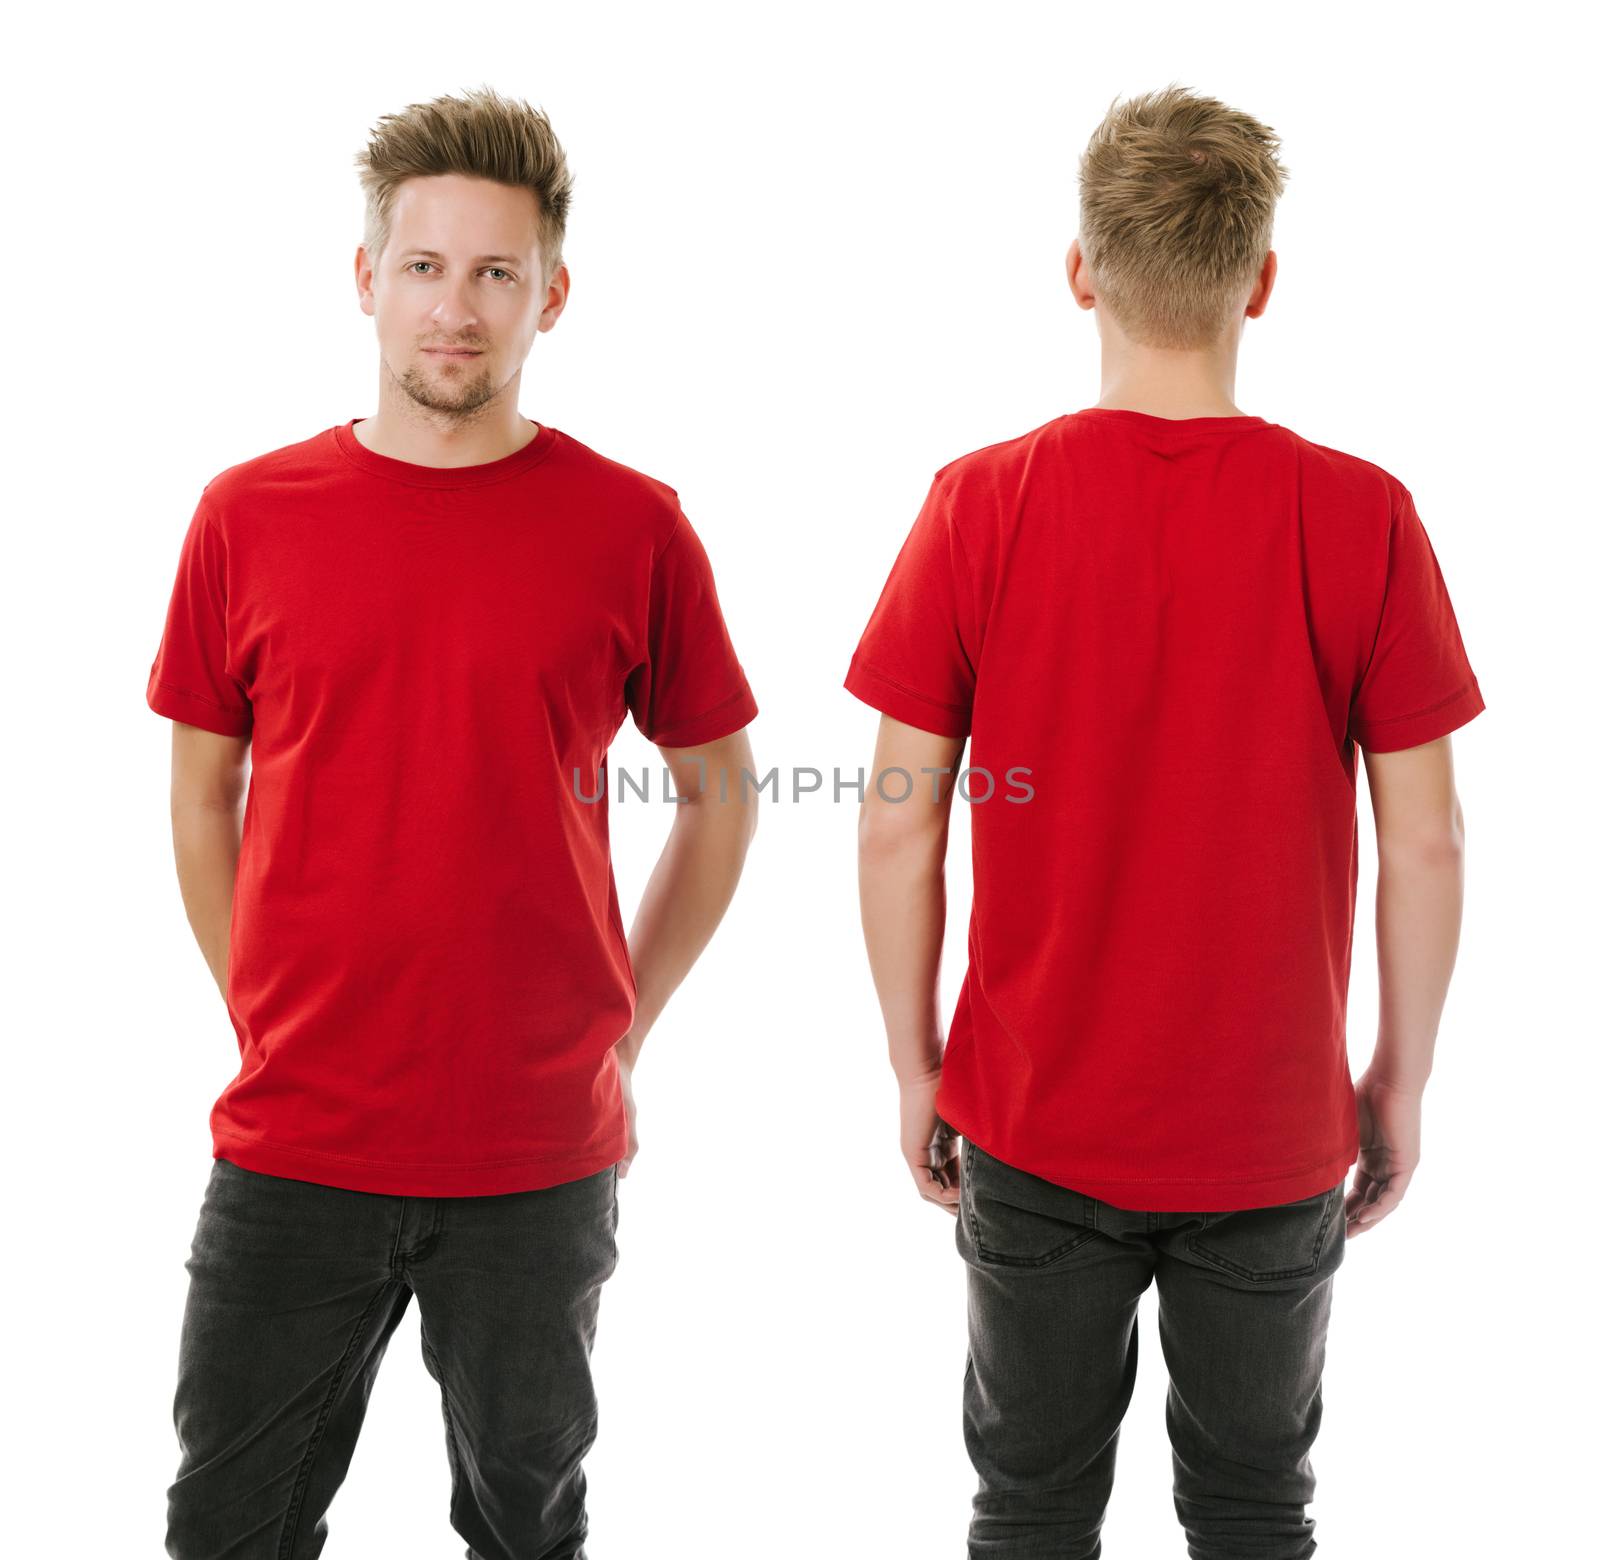 Photo of a man wearing blank red t-shirt, front and back. Ready for your design or artwork.